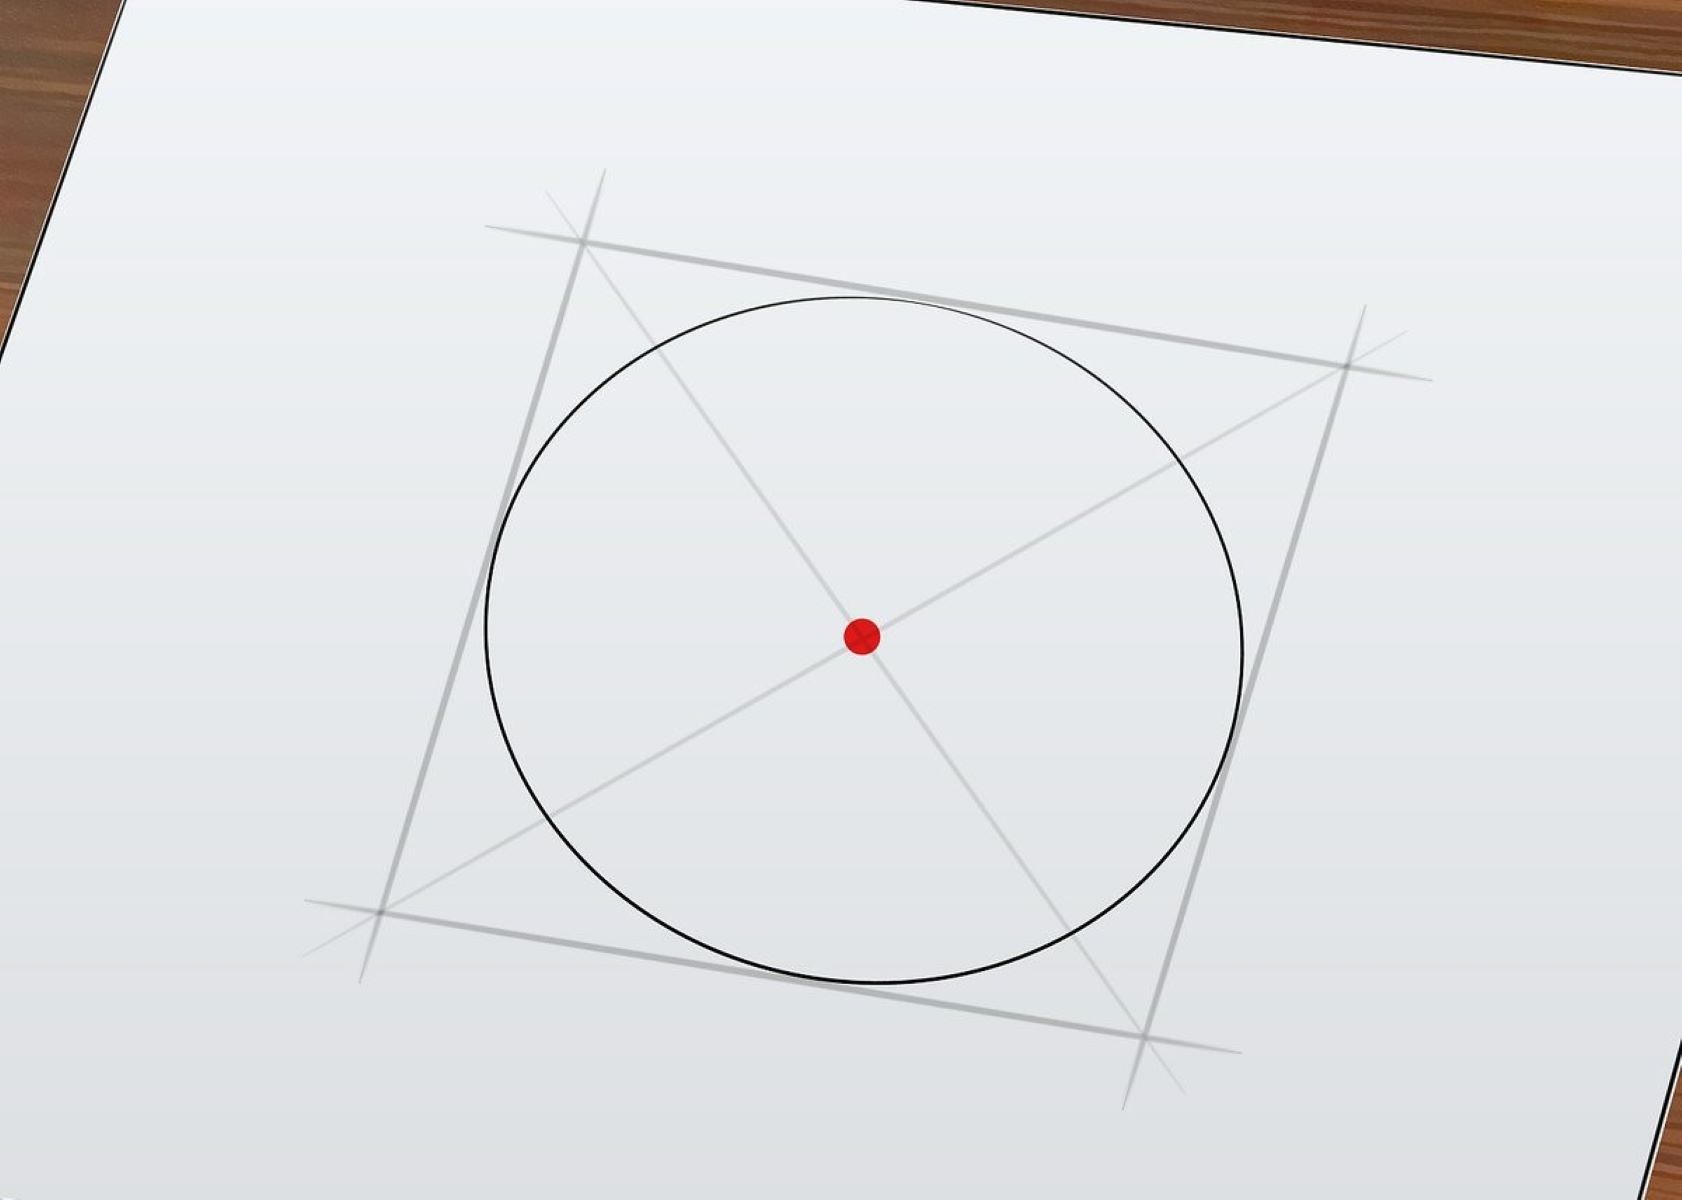 The Ultimate Guide To Finding The Perfect Rectangle In A Circle!